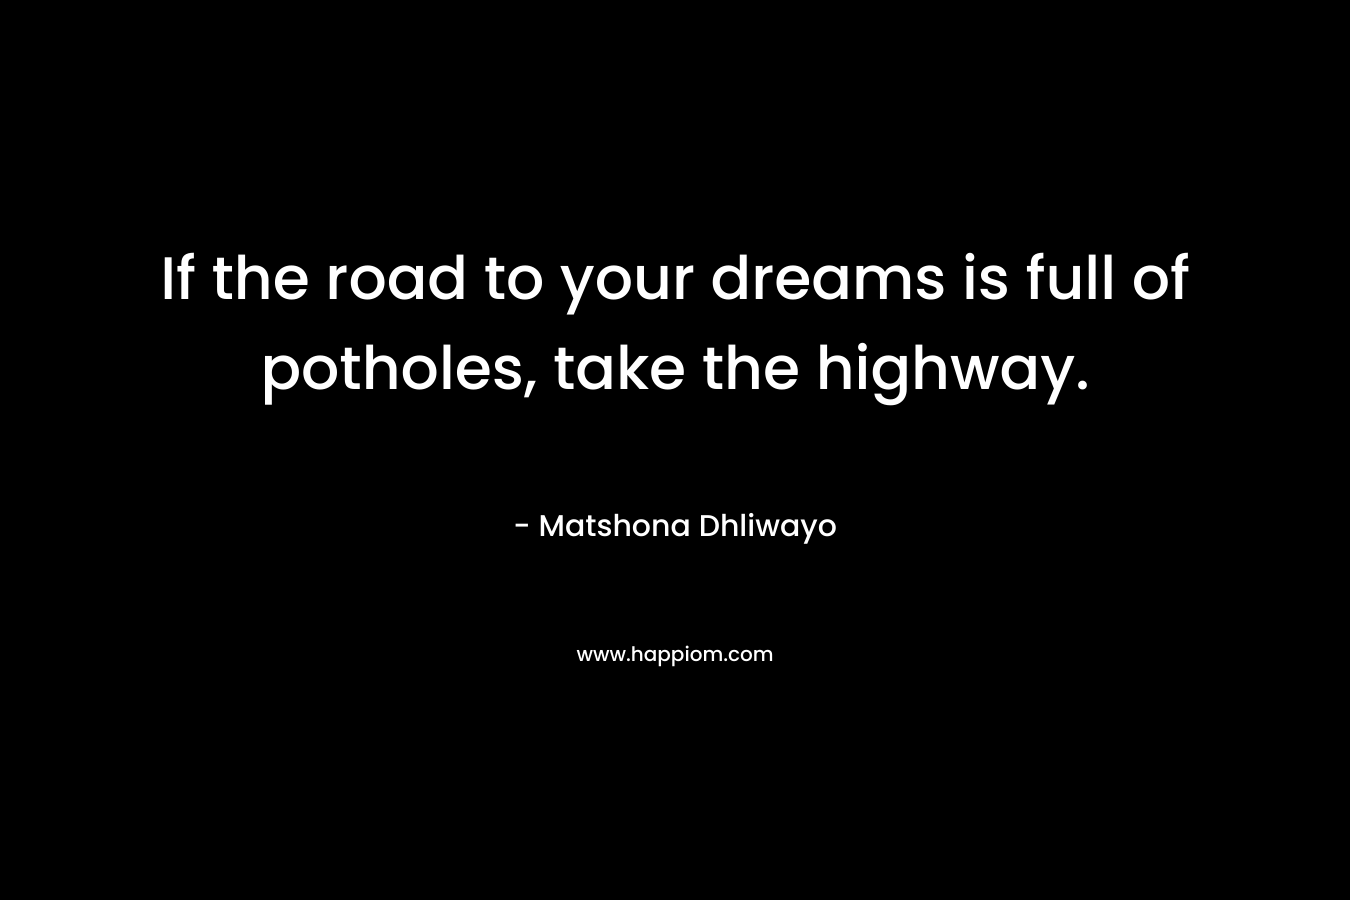 If the road to your dreams is full of potholes, take the highway.